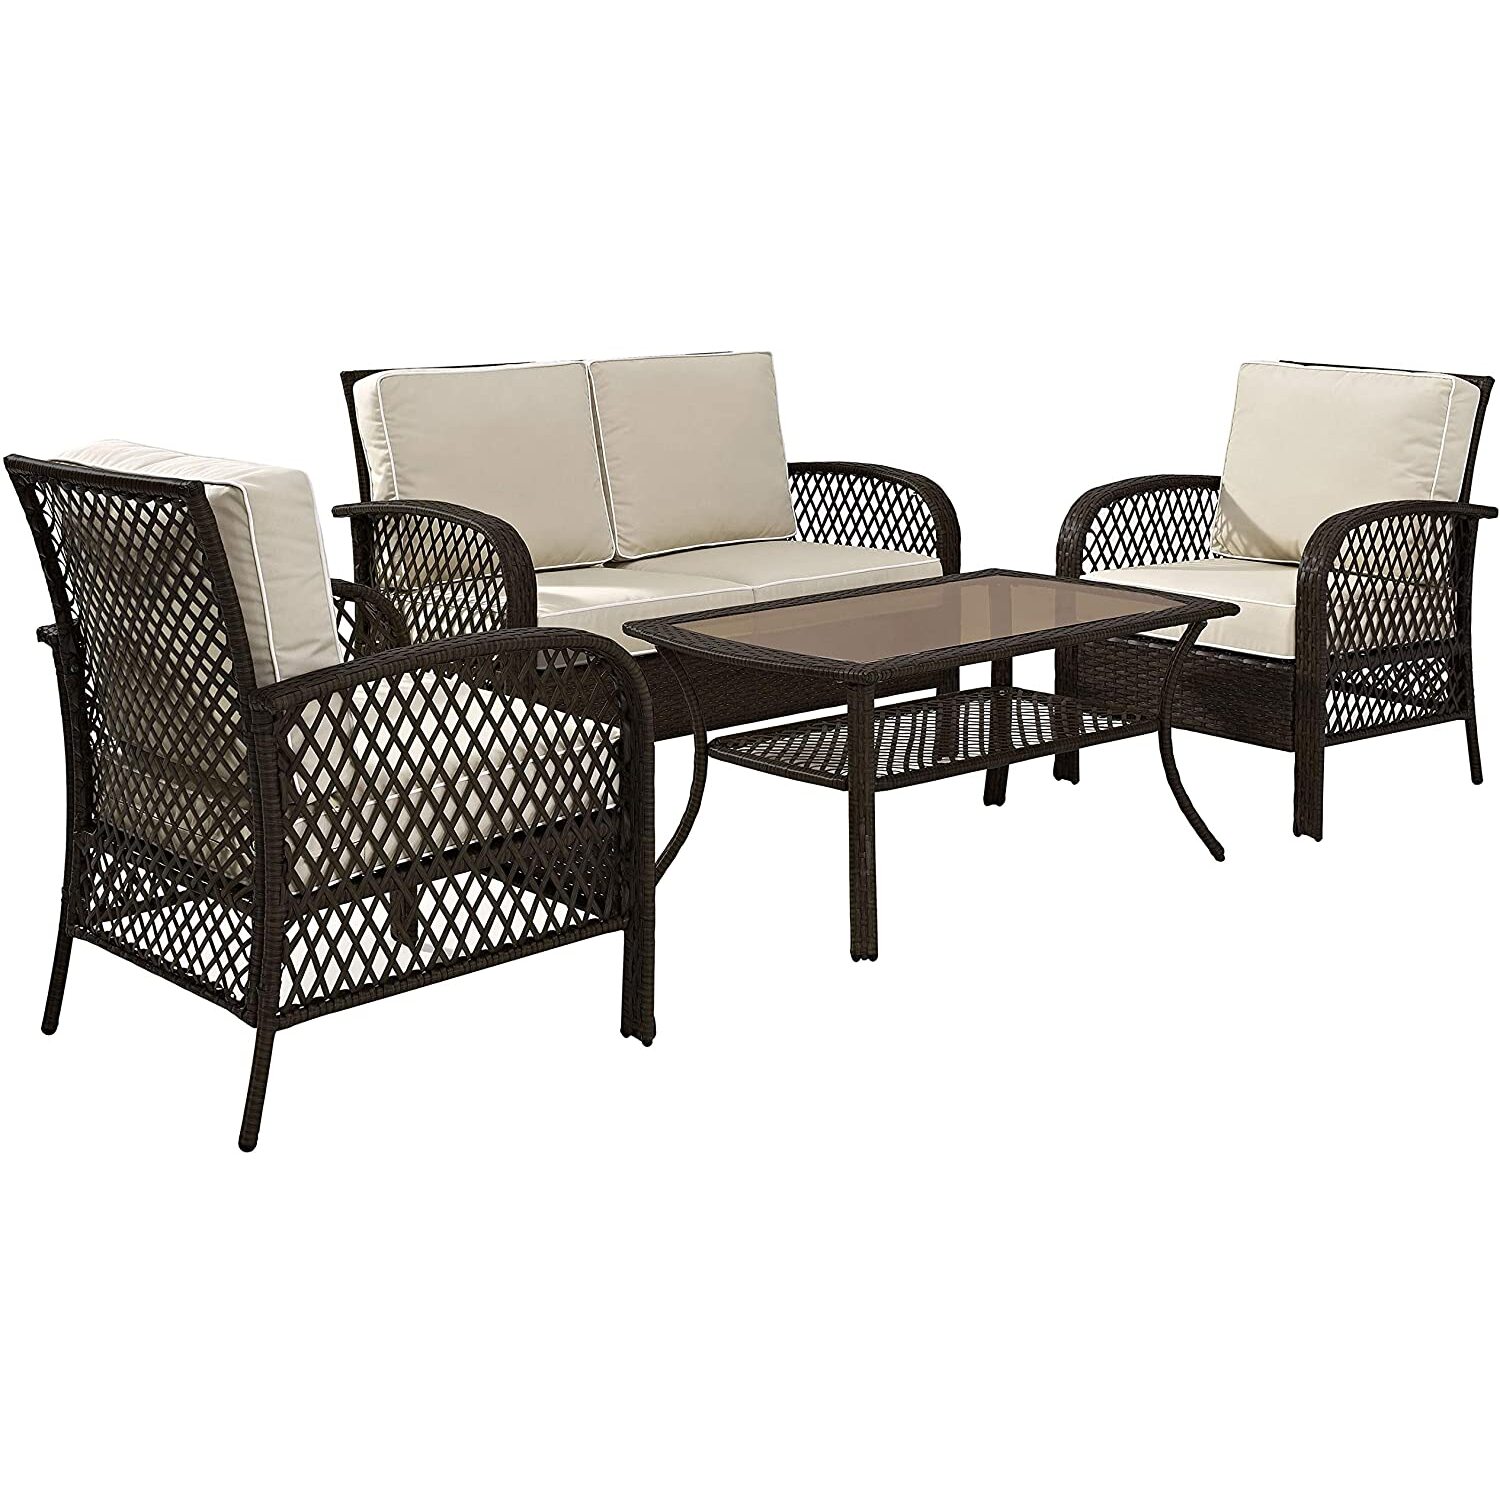 Crosley Tribeca 4 Piece Wicker Patio Sofa Set in Brown and Sand - image 1 of 10